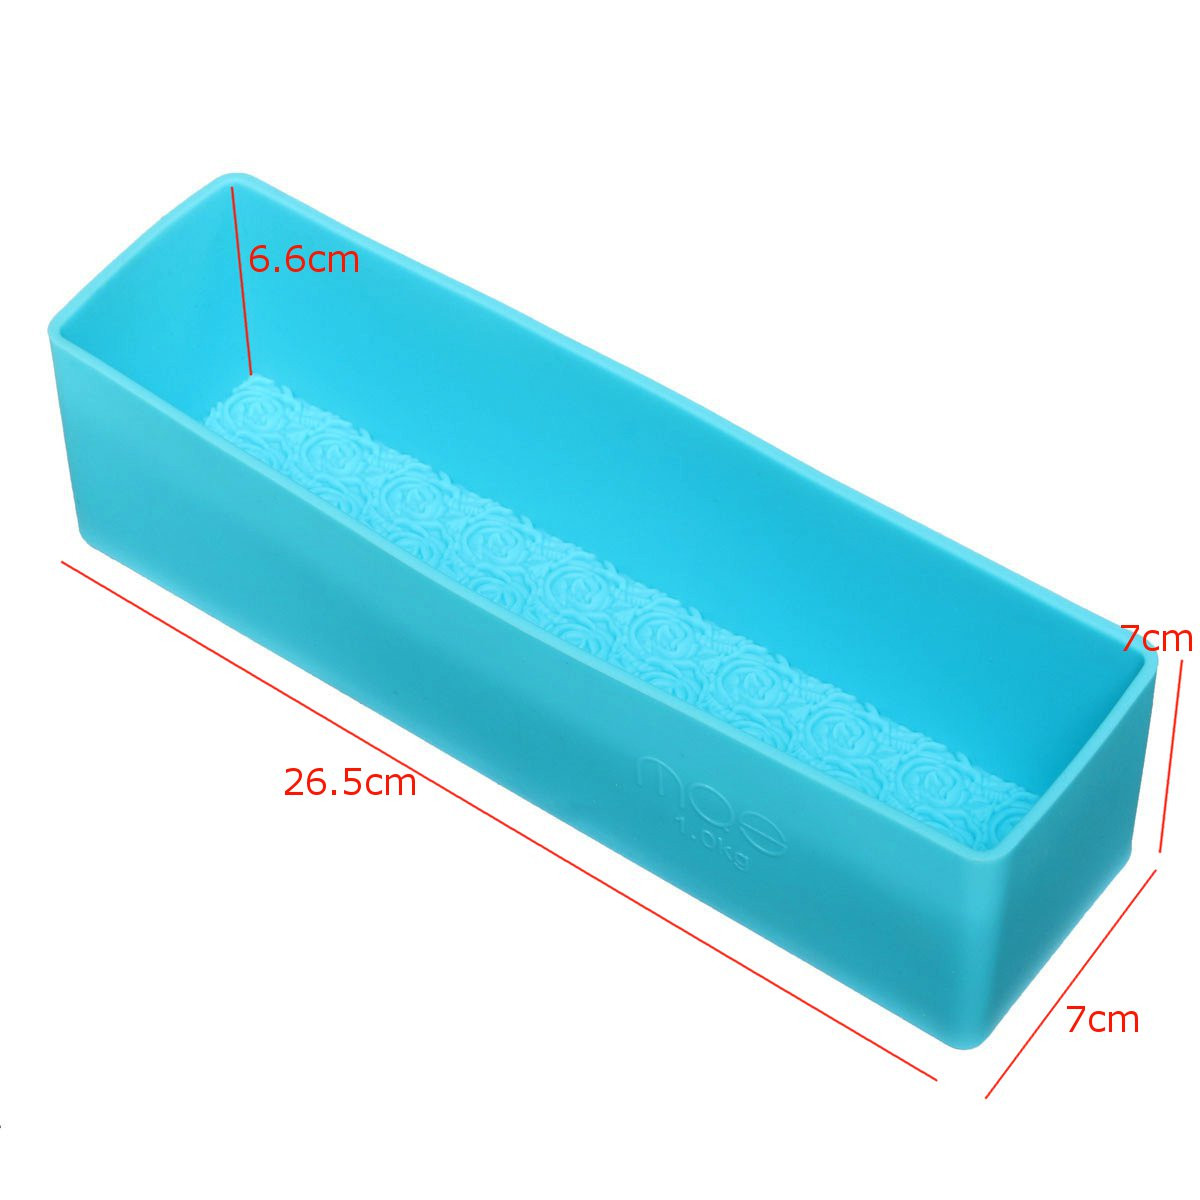 Rose-Toast-Silicone-Soap-Mold-Loaf-Cake-Baking-Bread-Tools-DIY-Chocolate-Mould-1525534